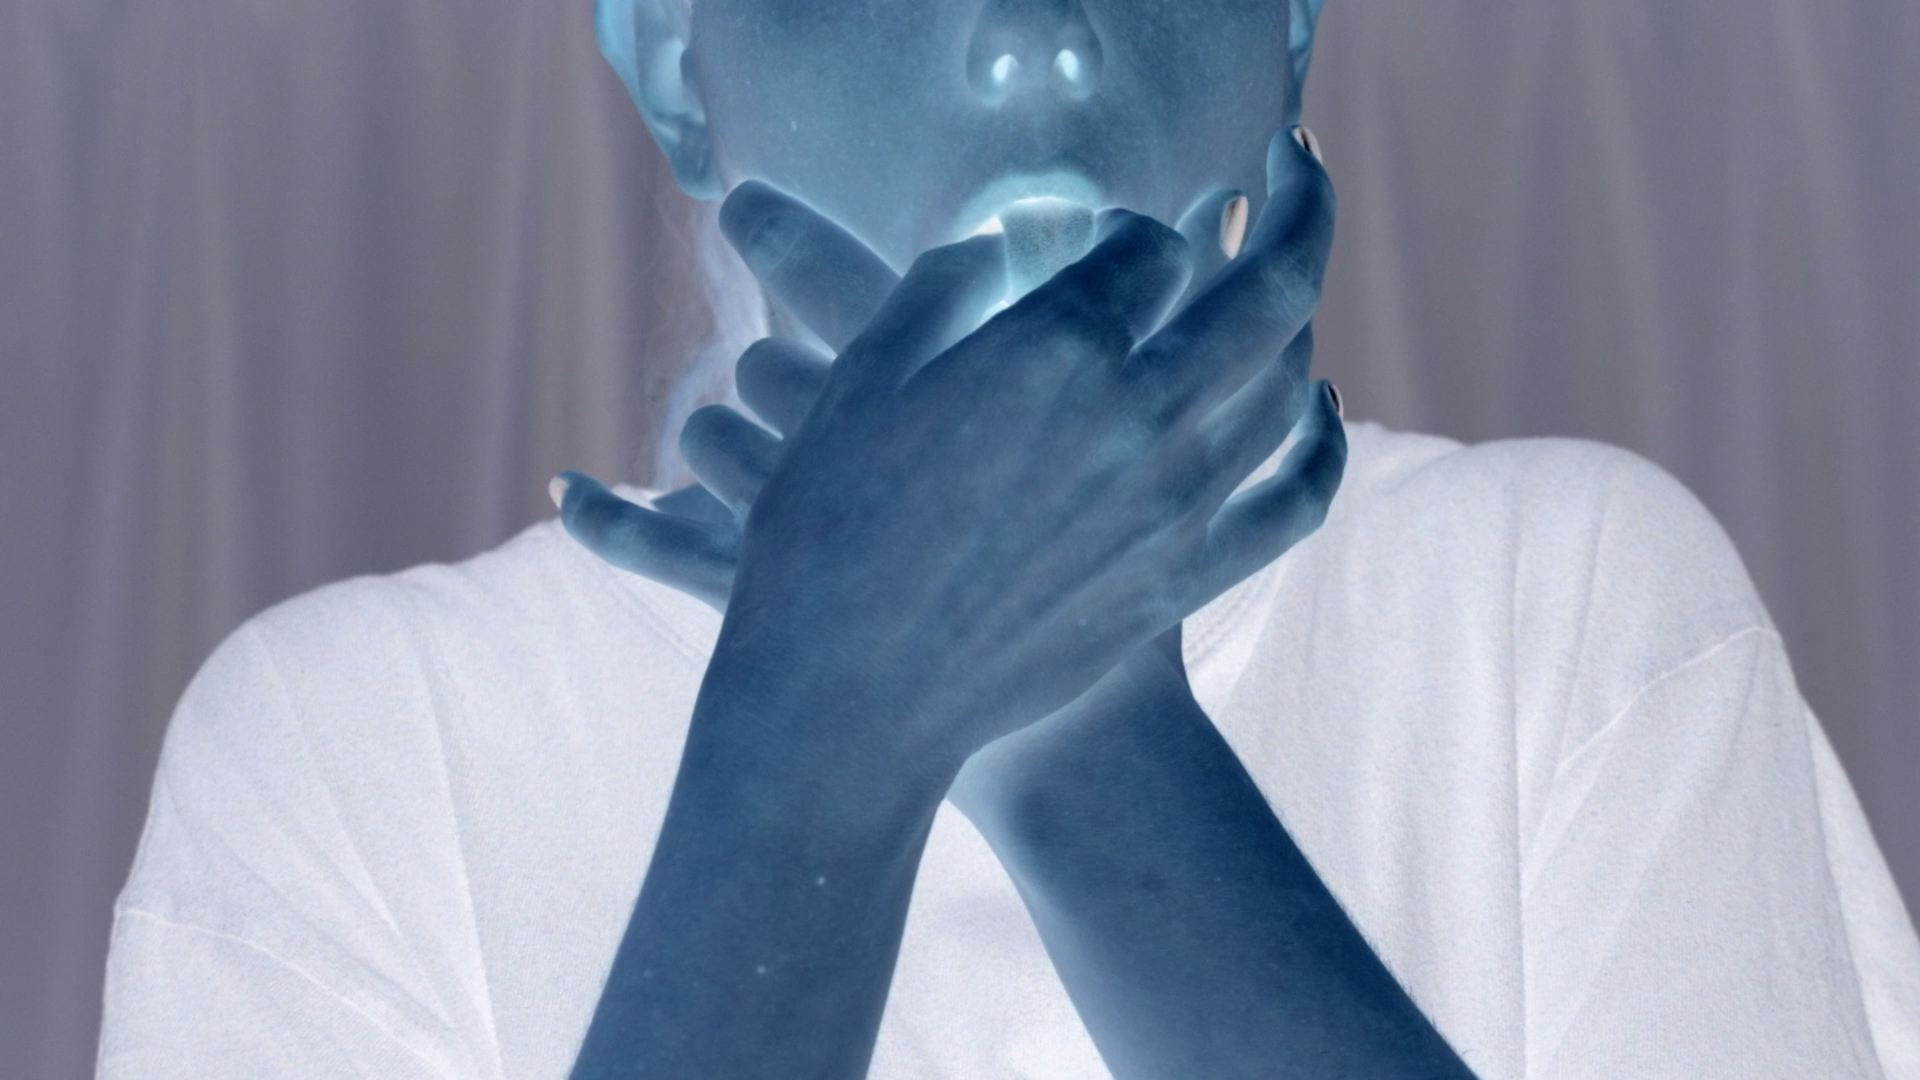 An inverted colour image of a person putting their hands into their mouth, grabbing their tongue.